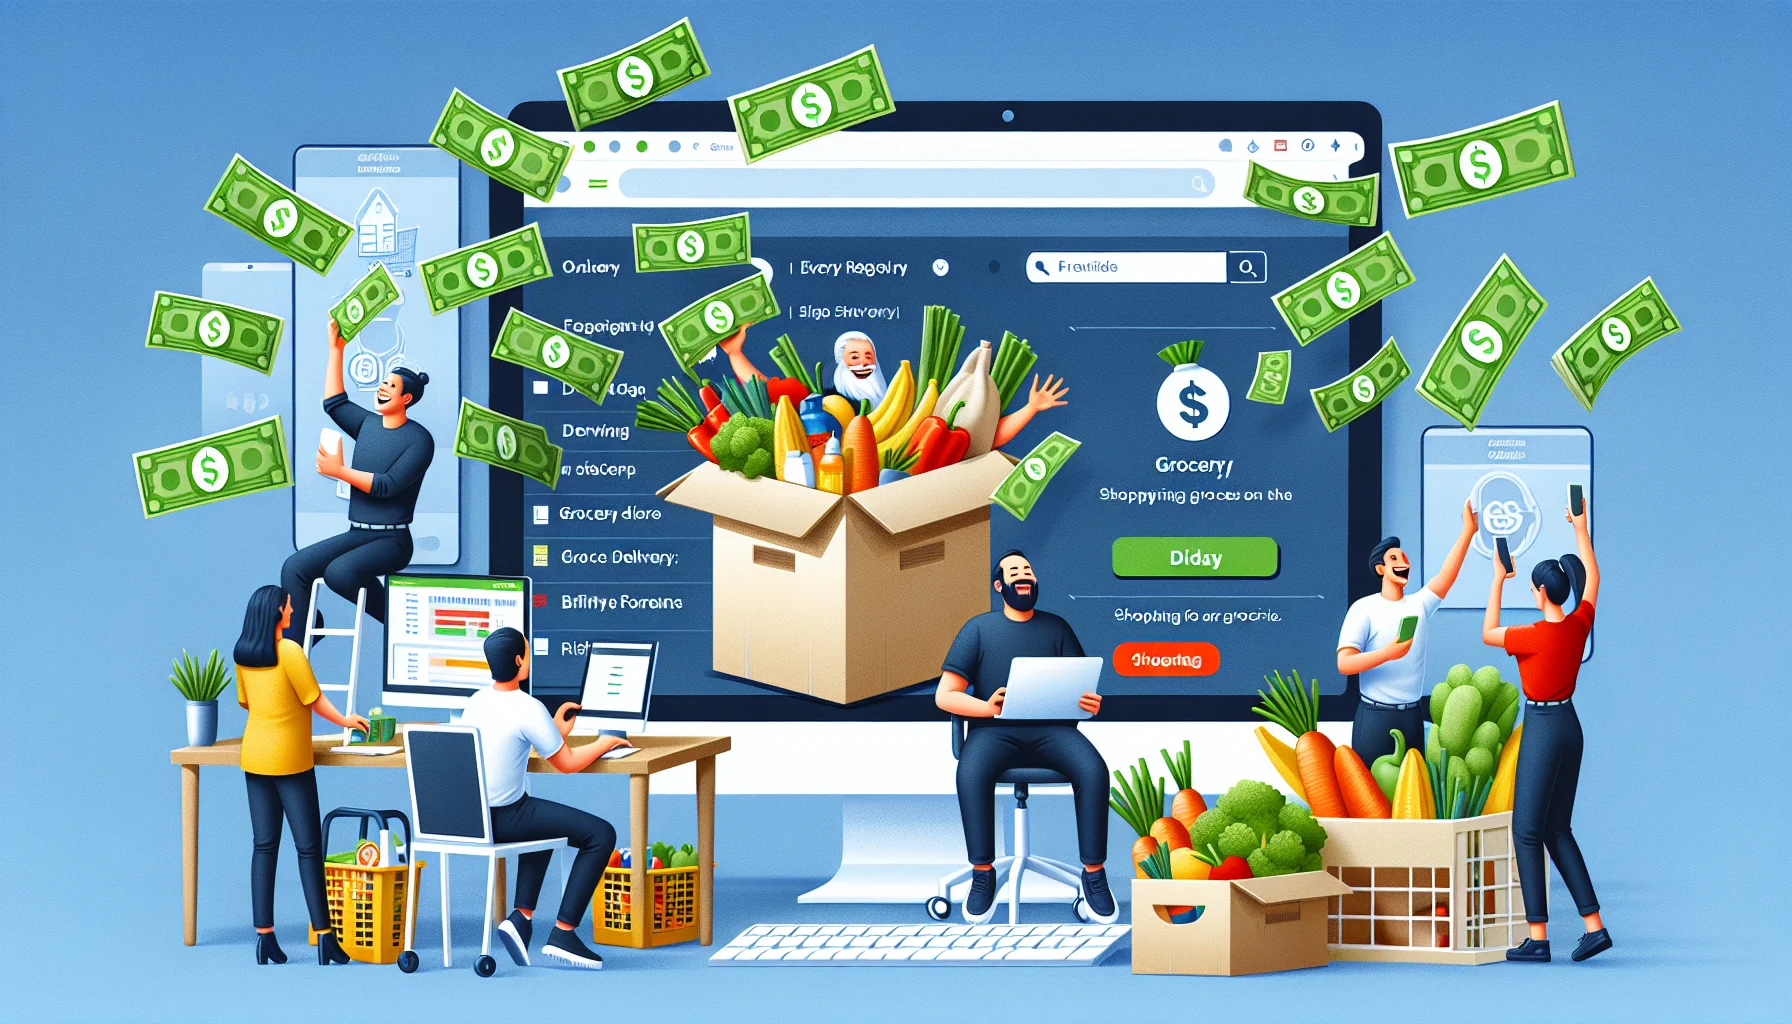 Design a engaging and humorous image that represents an online affiliate program similar to a grocery delivery service. This can include images of people counting stacks of money they earned online, while shopping for groceries on their computers. The scenario should depict the lucrative prospects of said program in a realistic setting. This scene unfolds within a modern workspace with tabs open showing the grocery website and performance metrics. Also include diverse range of individuals of different genders and descents including Caucasian, Hispanic, and Asian, rejoicing over their online earnings.